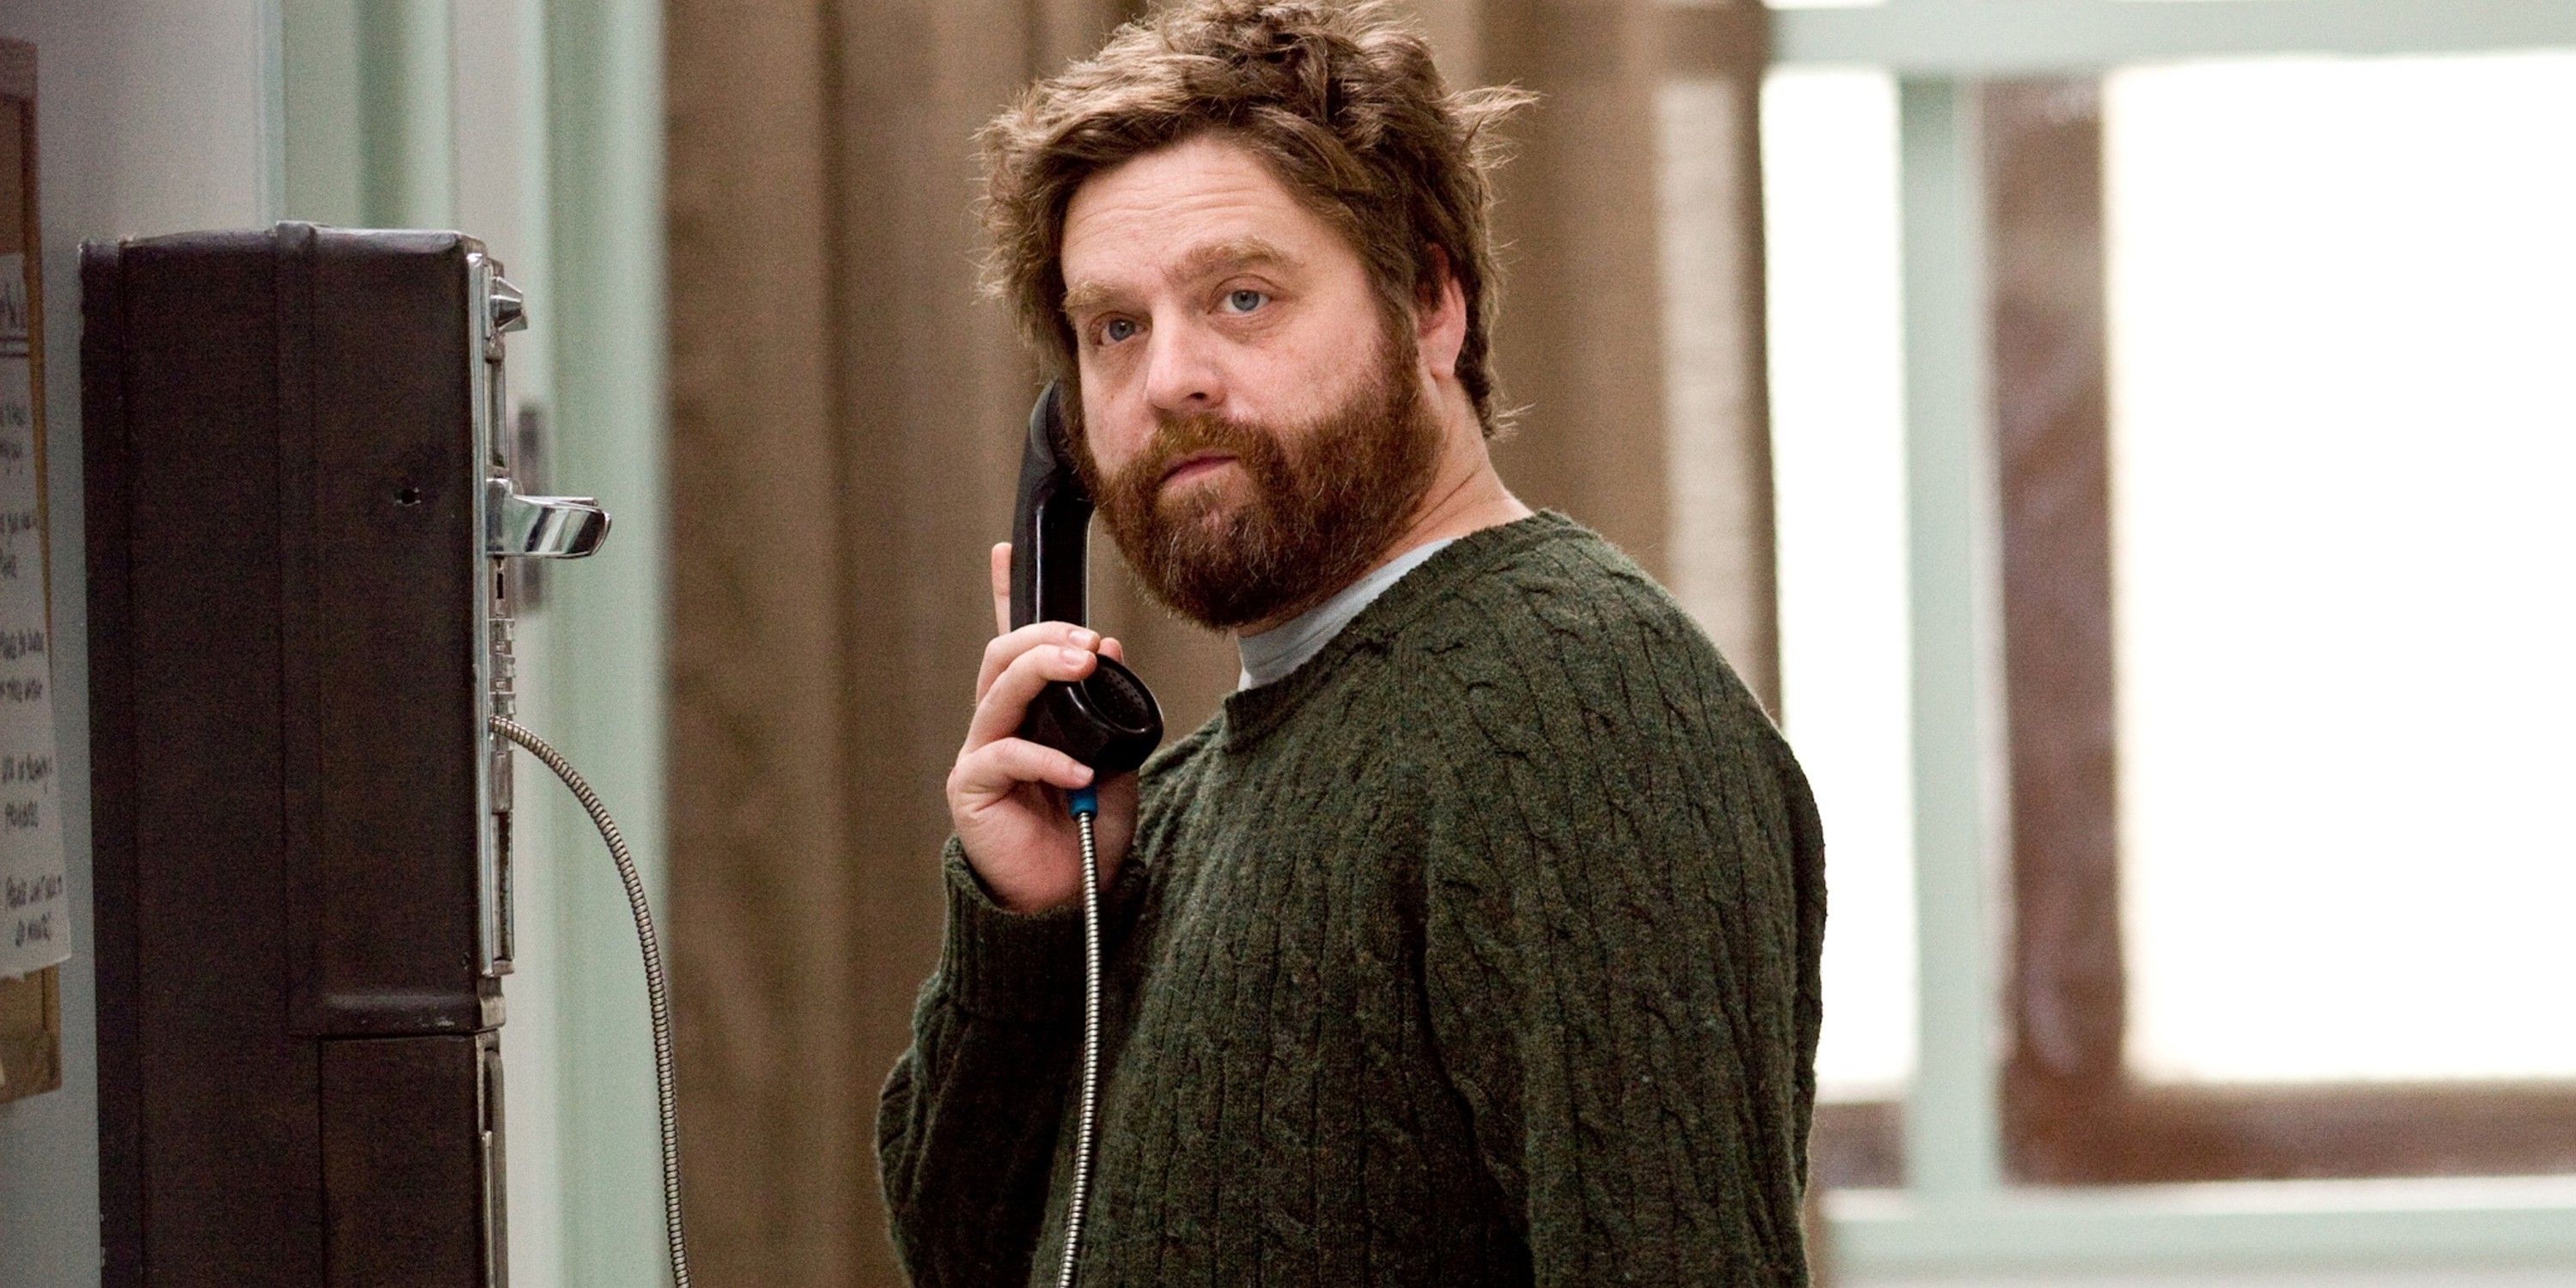 Zach Galifianakis as Bobby in It's Kind of a Funny Story